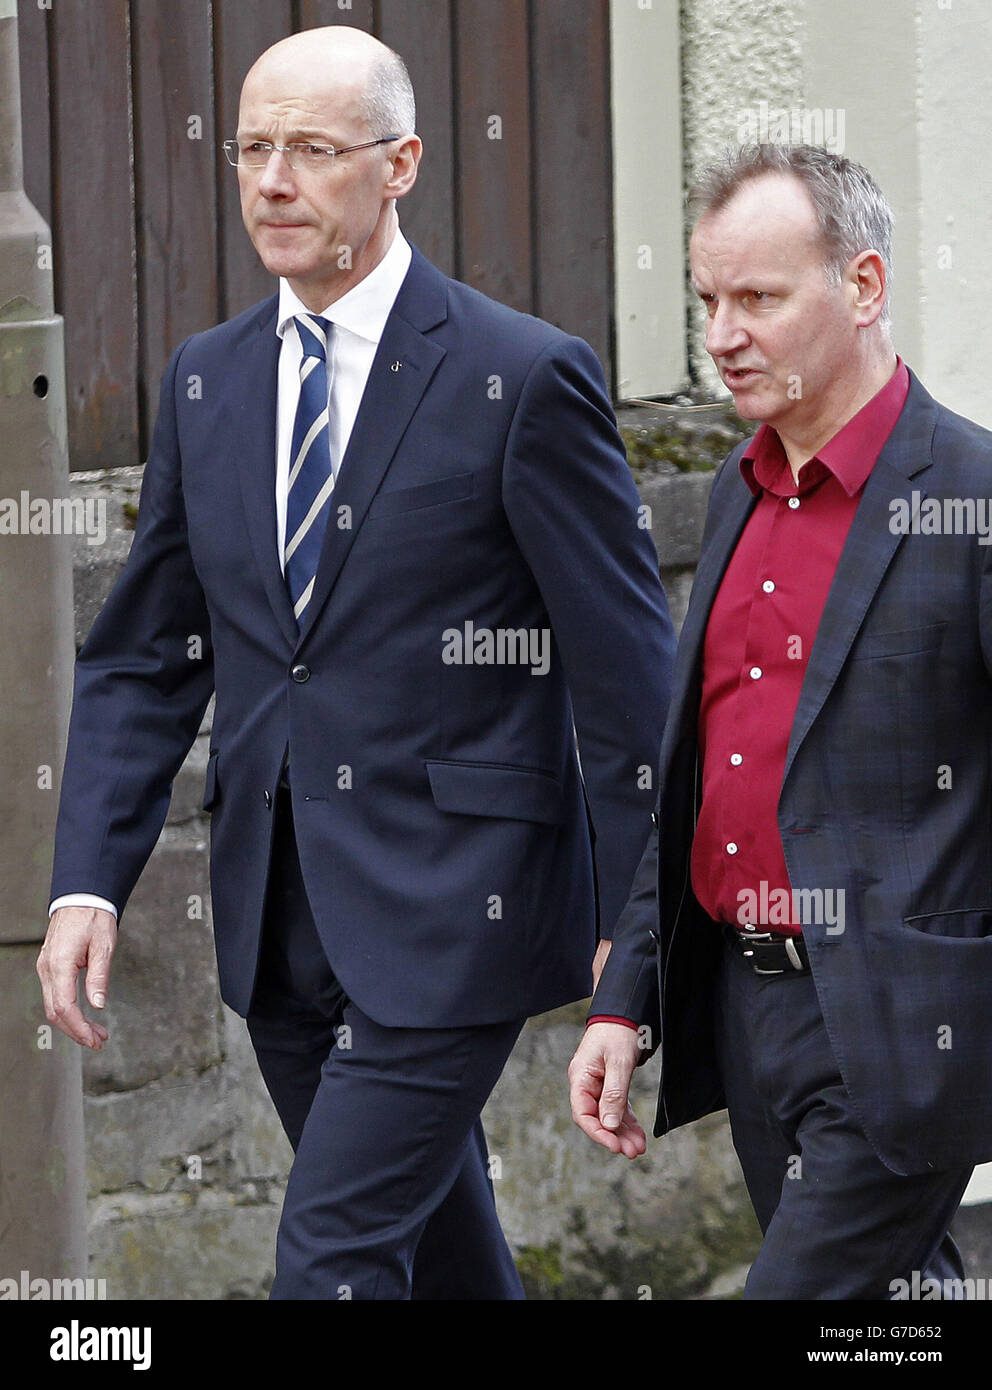 Scottish Finance Secretary John Swinney (left) and Pete Wishart MP arriving at Perth Congregational Church for the memorial service to David Haines, the British aid worker beheaded by ISIS militants. Stock Photo